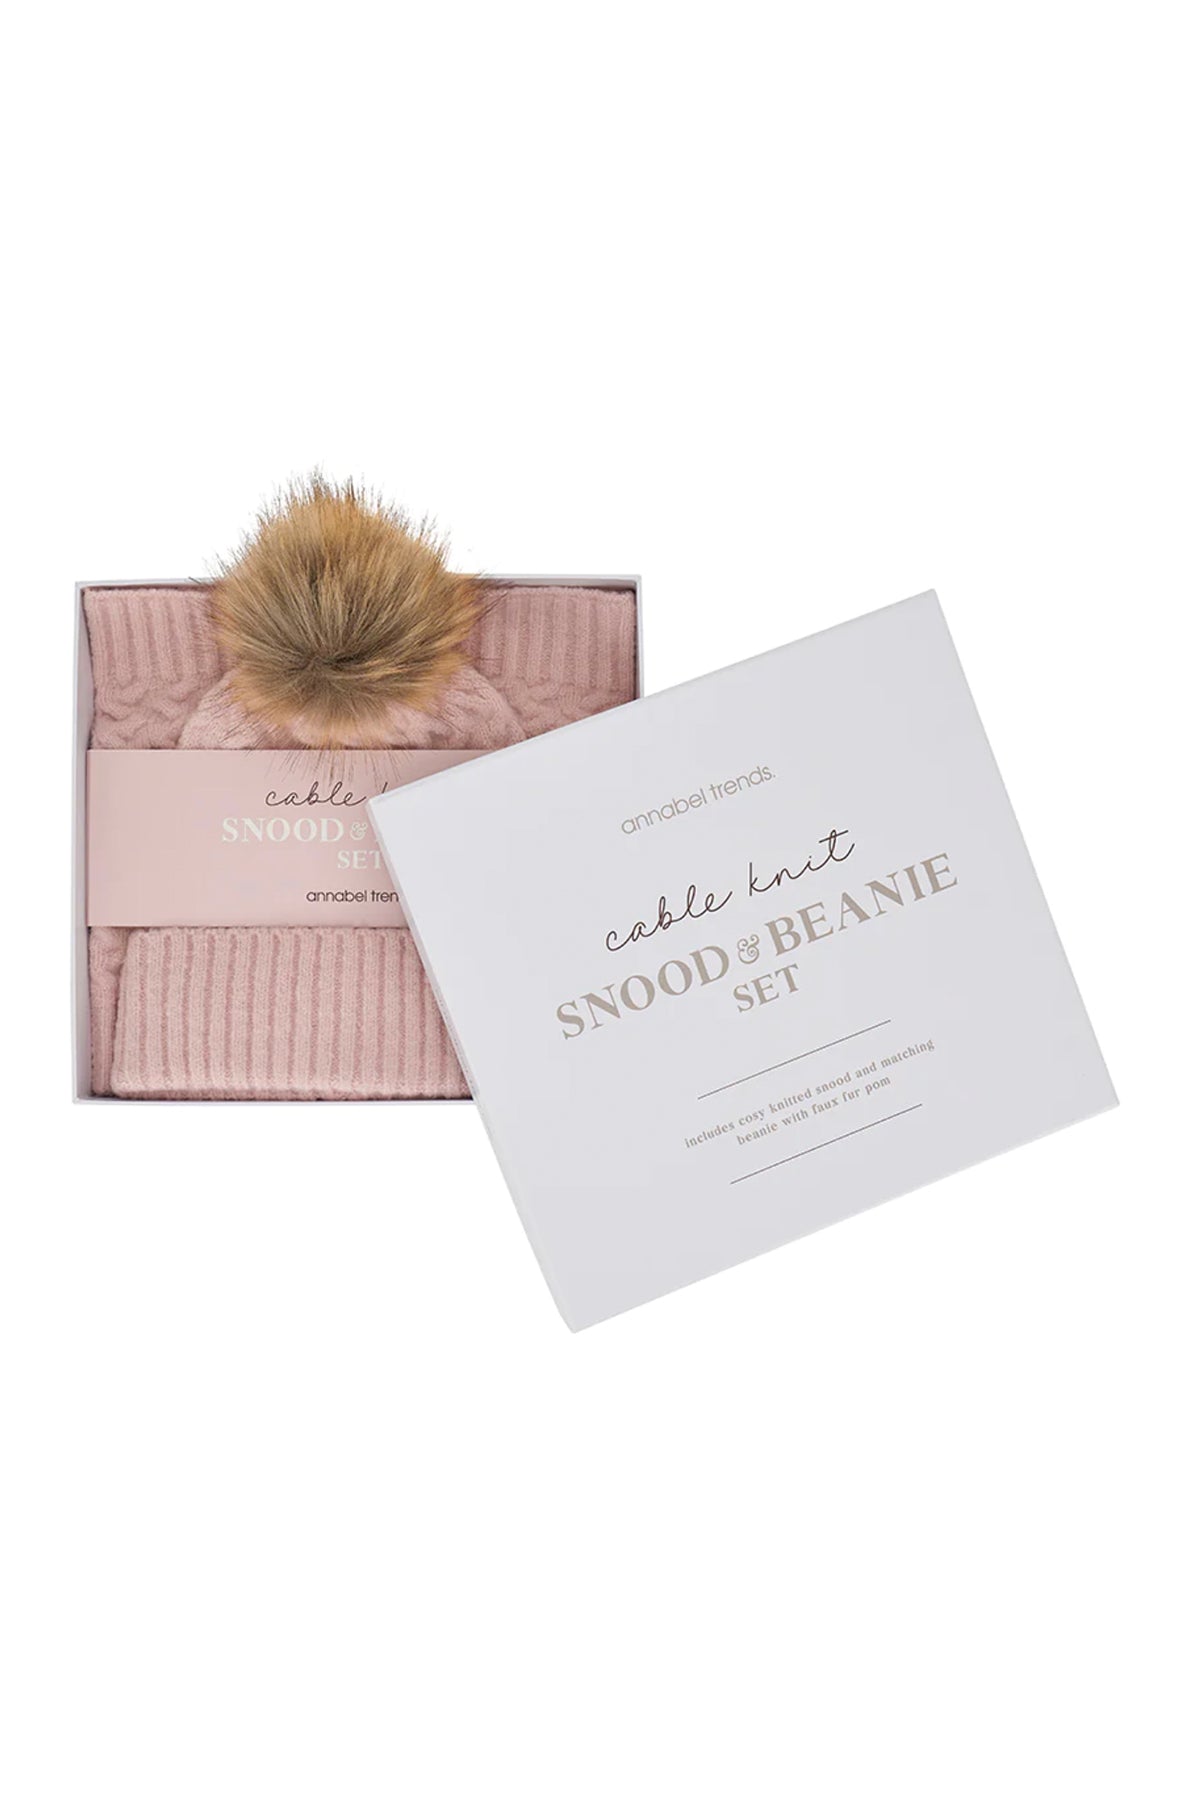 Cable Knit Snood & Beanie Set Pink